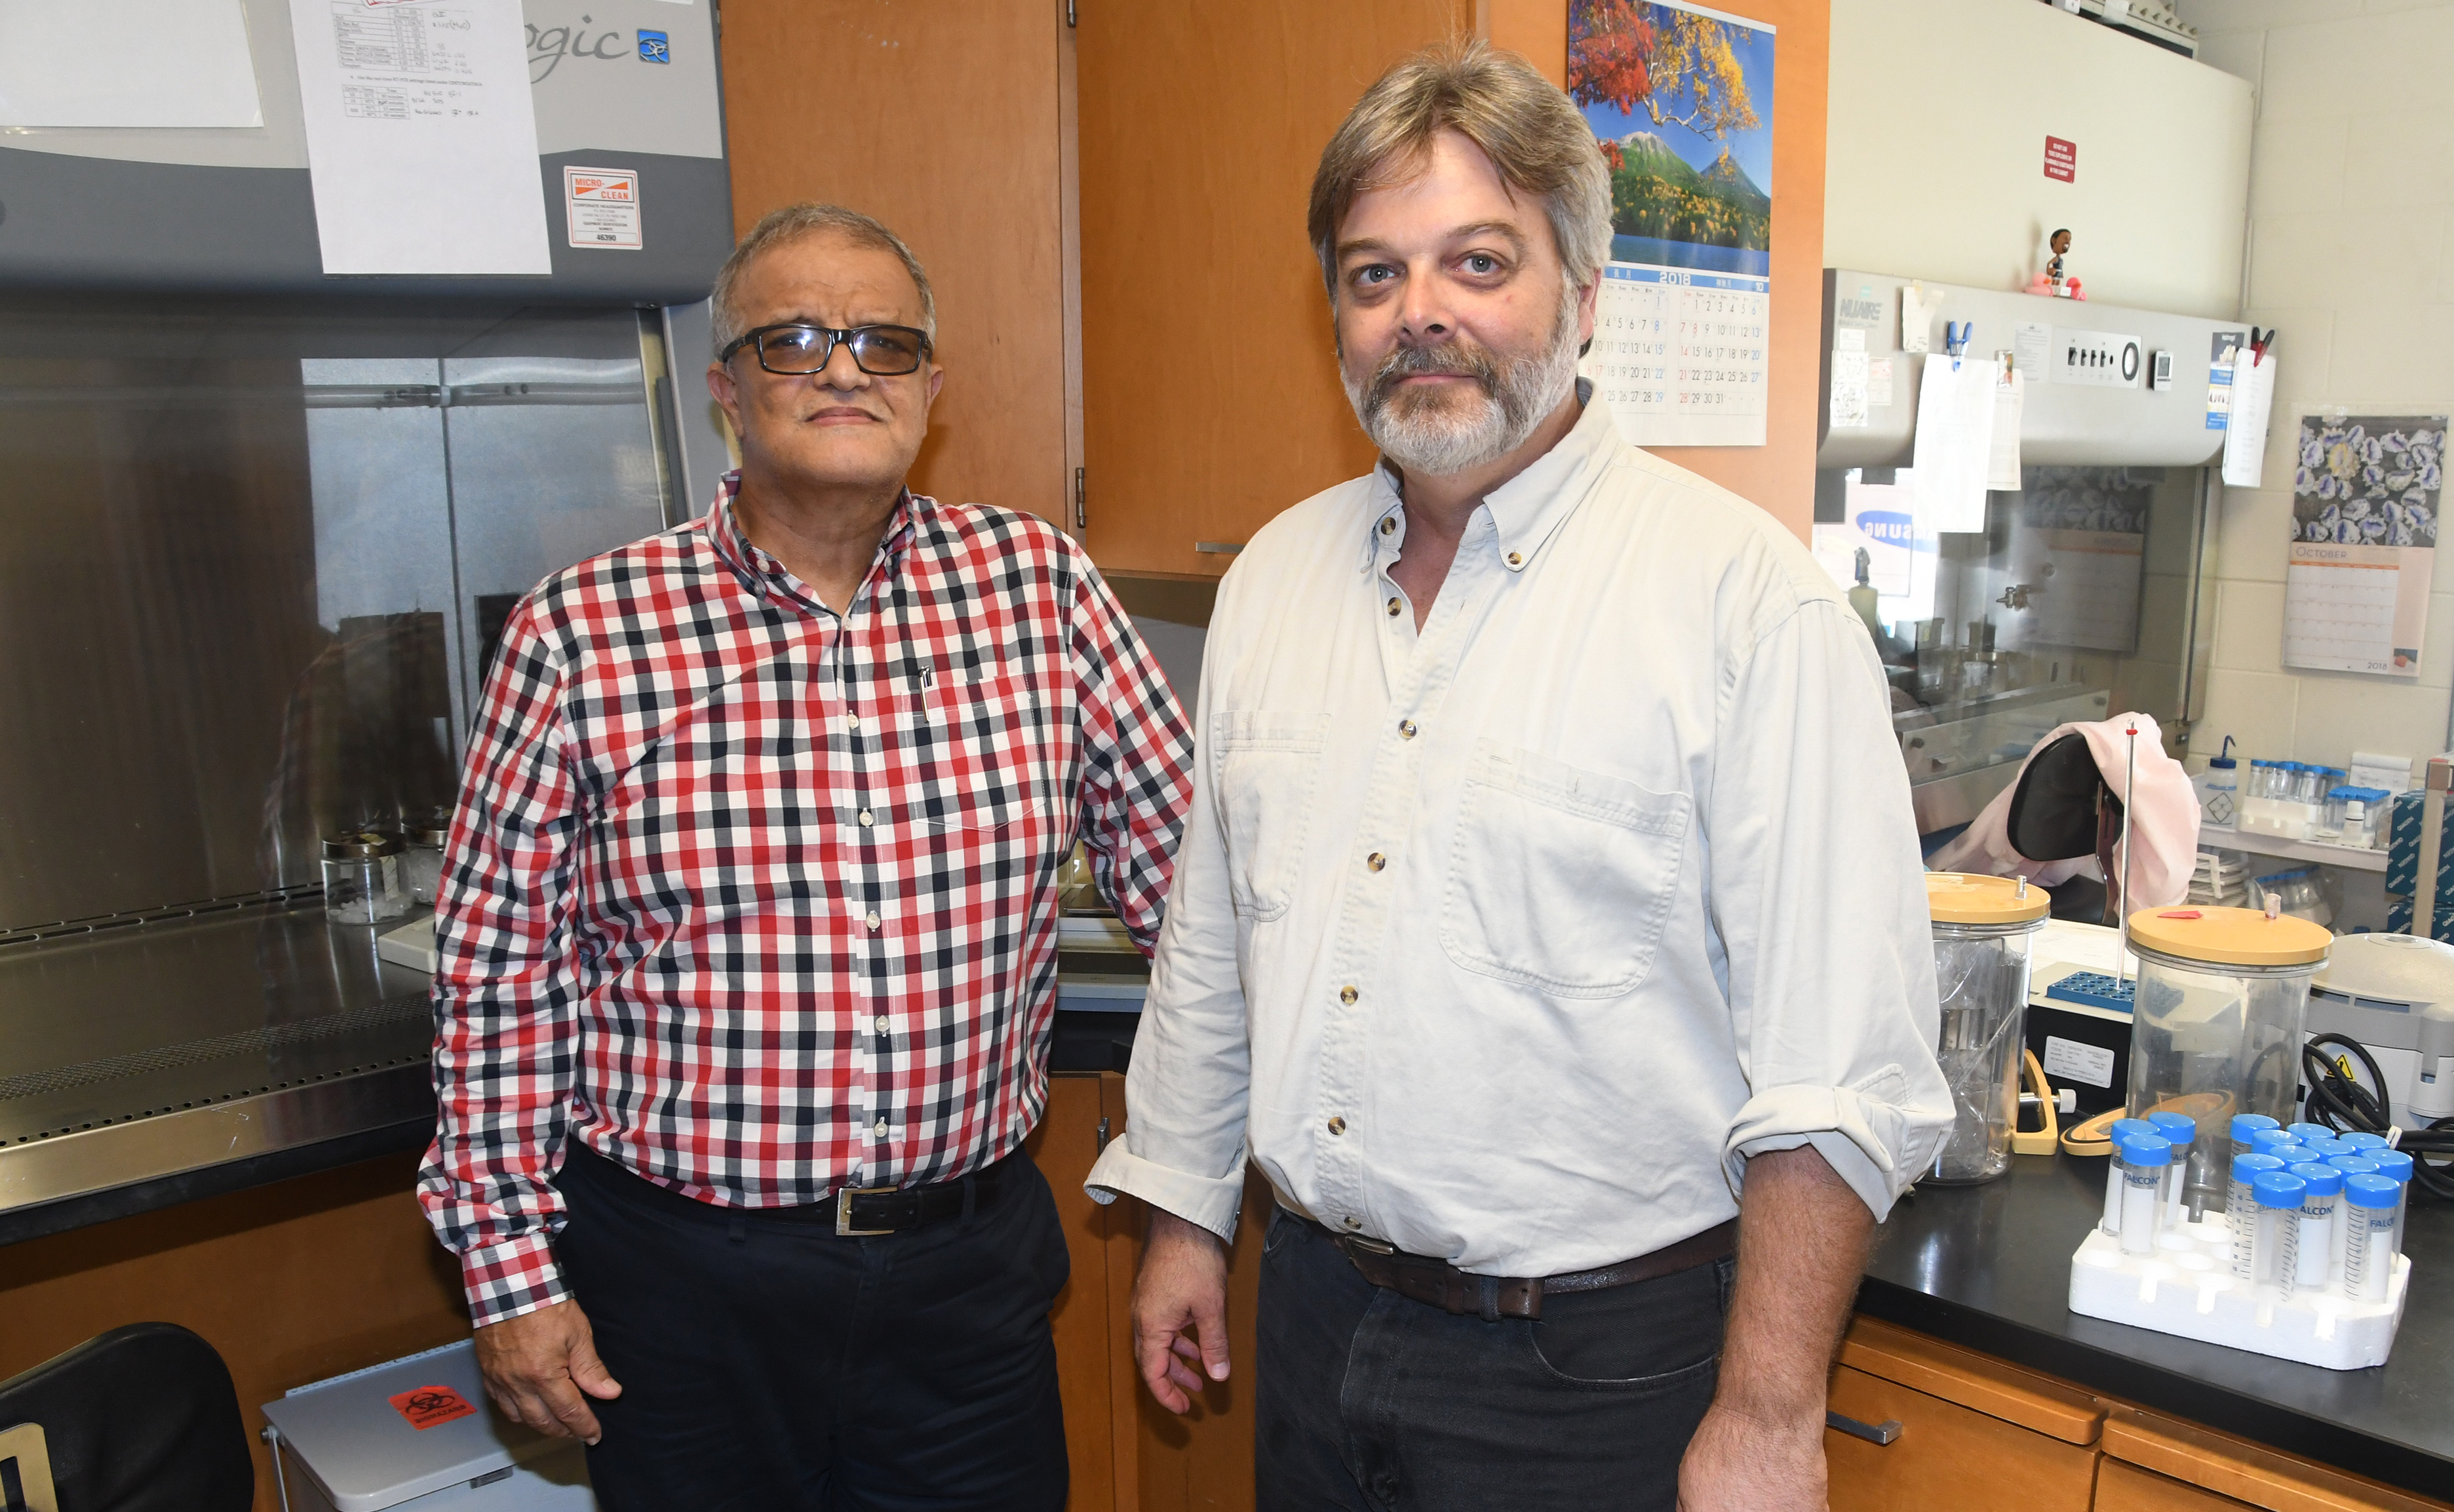 Dr. Aristides Marcano (l), Professor of Physics and principal investigator of the grant, will collaborate with Dr. David Kingsley of the Food Safety Lab on campus on laser research that could lead to improvements in the way foods and biologicals are sanitized.